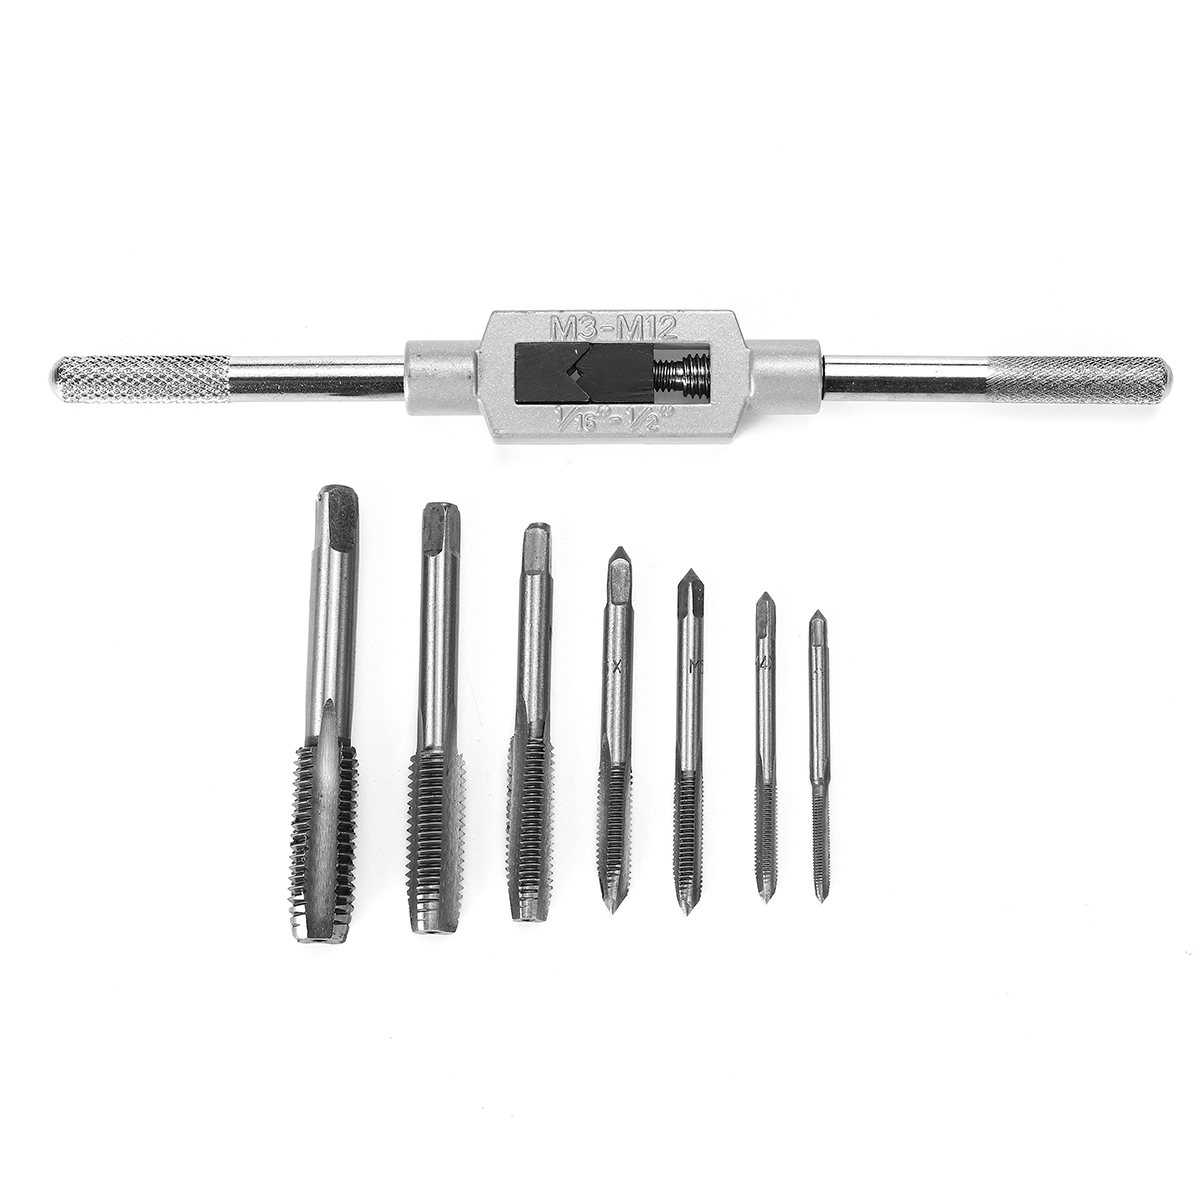 

7pcs M3-M12 Screw Thread Tap With Adjustable Tap Wrench High Speed Steel Hand Tap Set